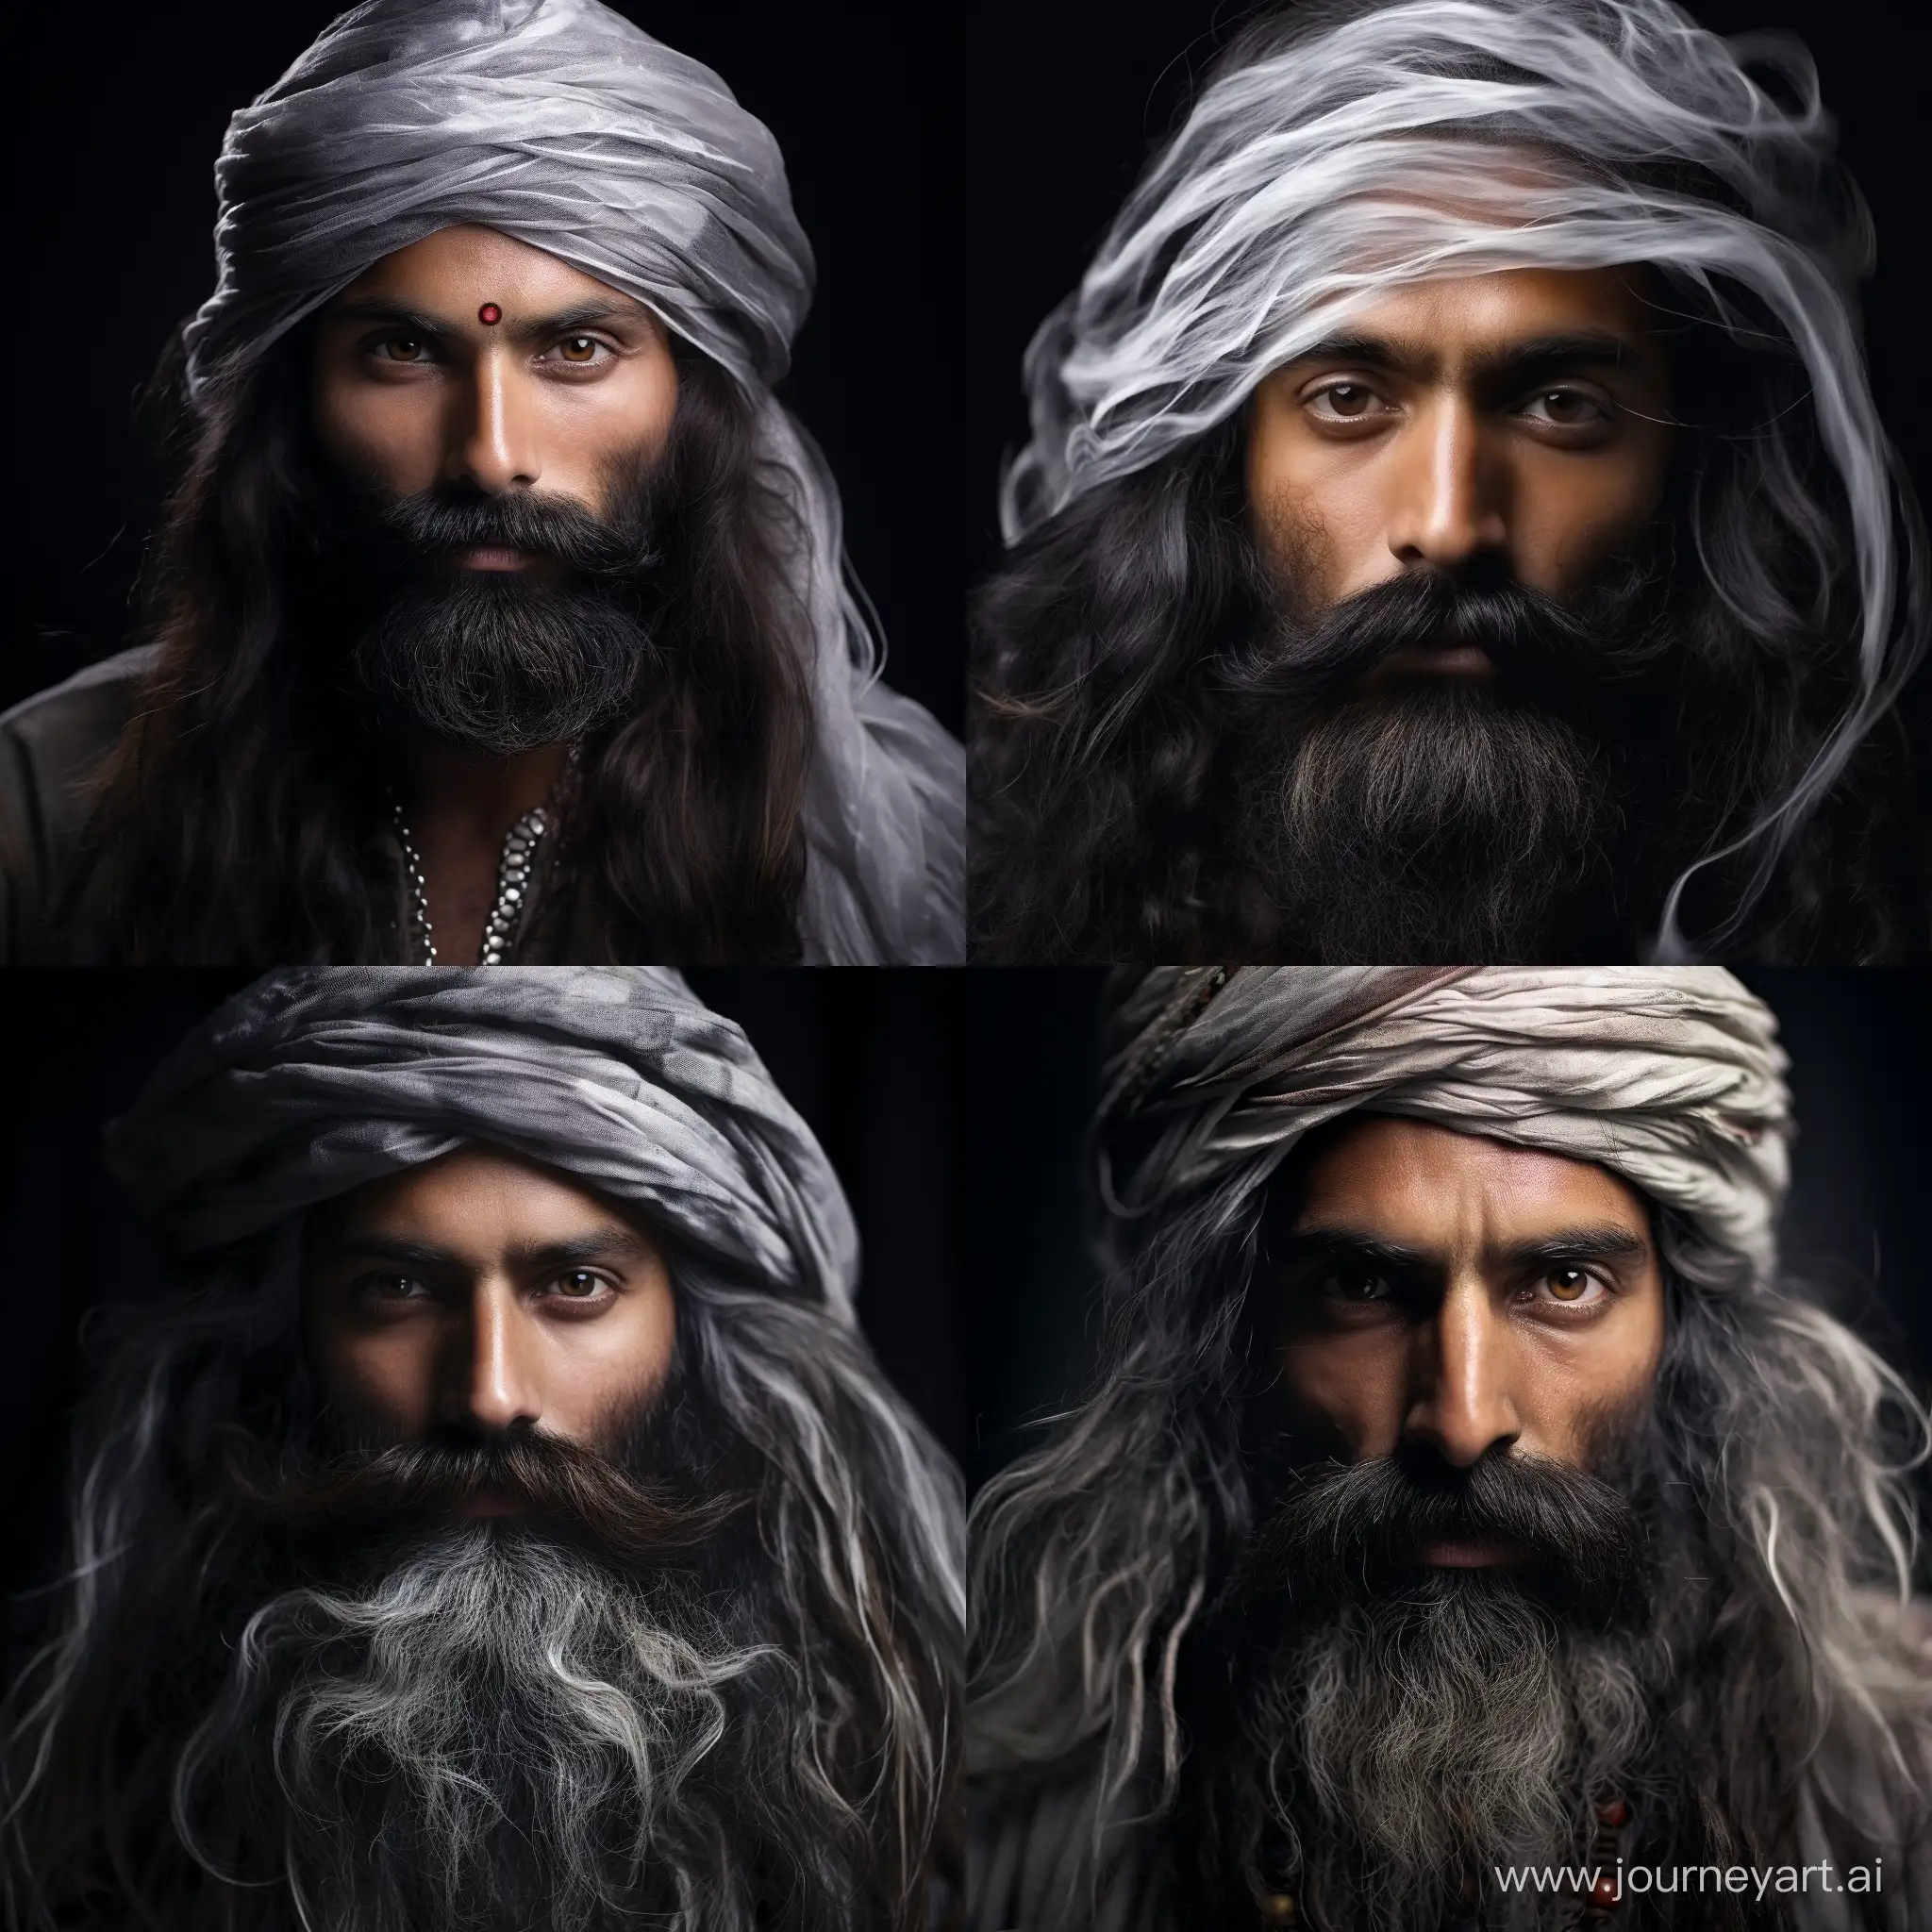 HighDetailed-Indian-Man-Portrait-Turbaned-Elegance-and-SaltandPepper-Mustache